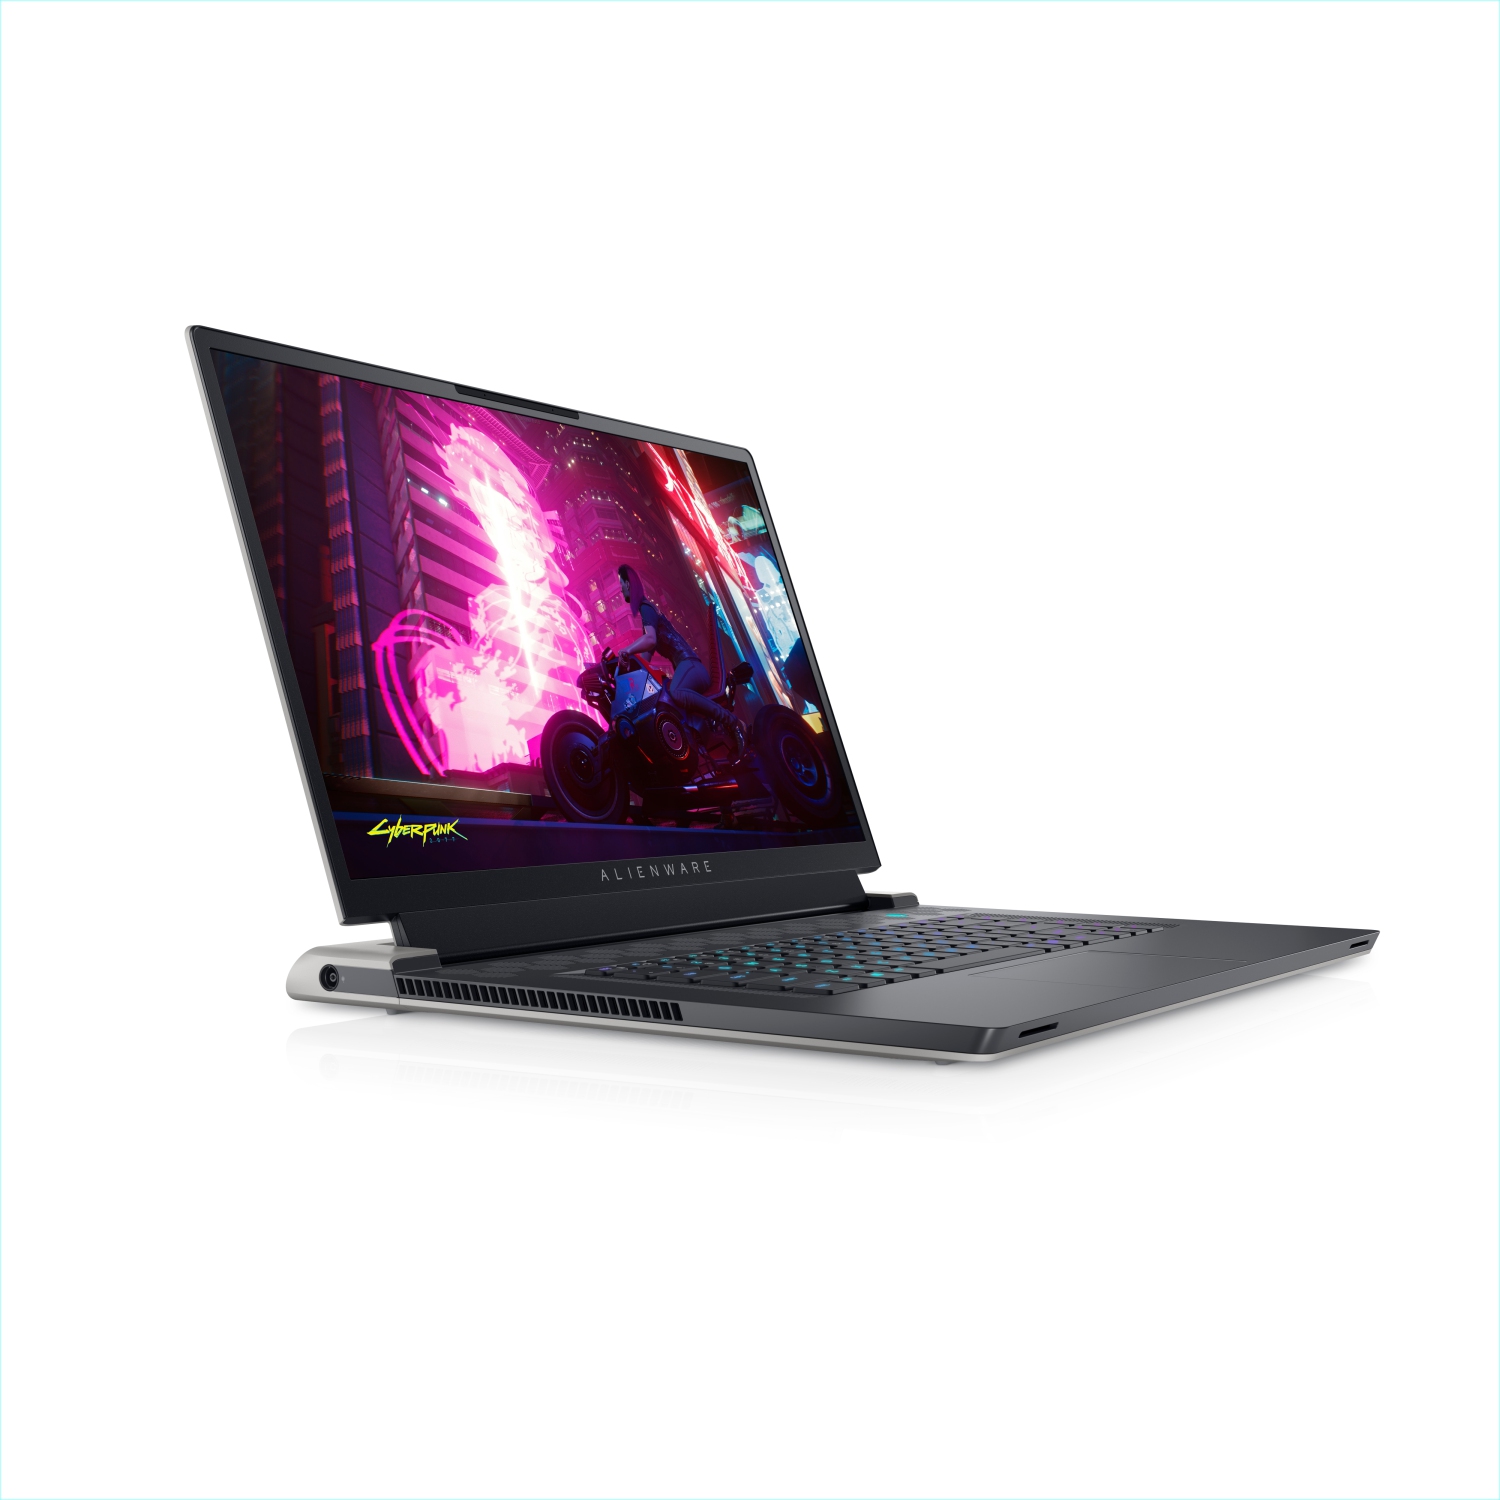 Refurbished (Excellent) - Dell Alienware X17 R1 Gaming Laptop (2021), 17.3" 4K, Core i7, 1TB SSD, 64GB RAM, RTX 3080, 8 Cores @ 4.6 GHz, 11th Gen CPU Certified